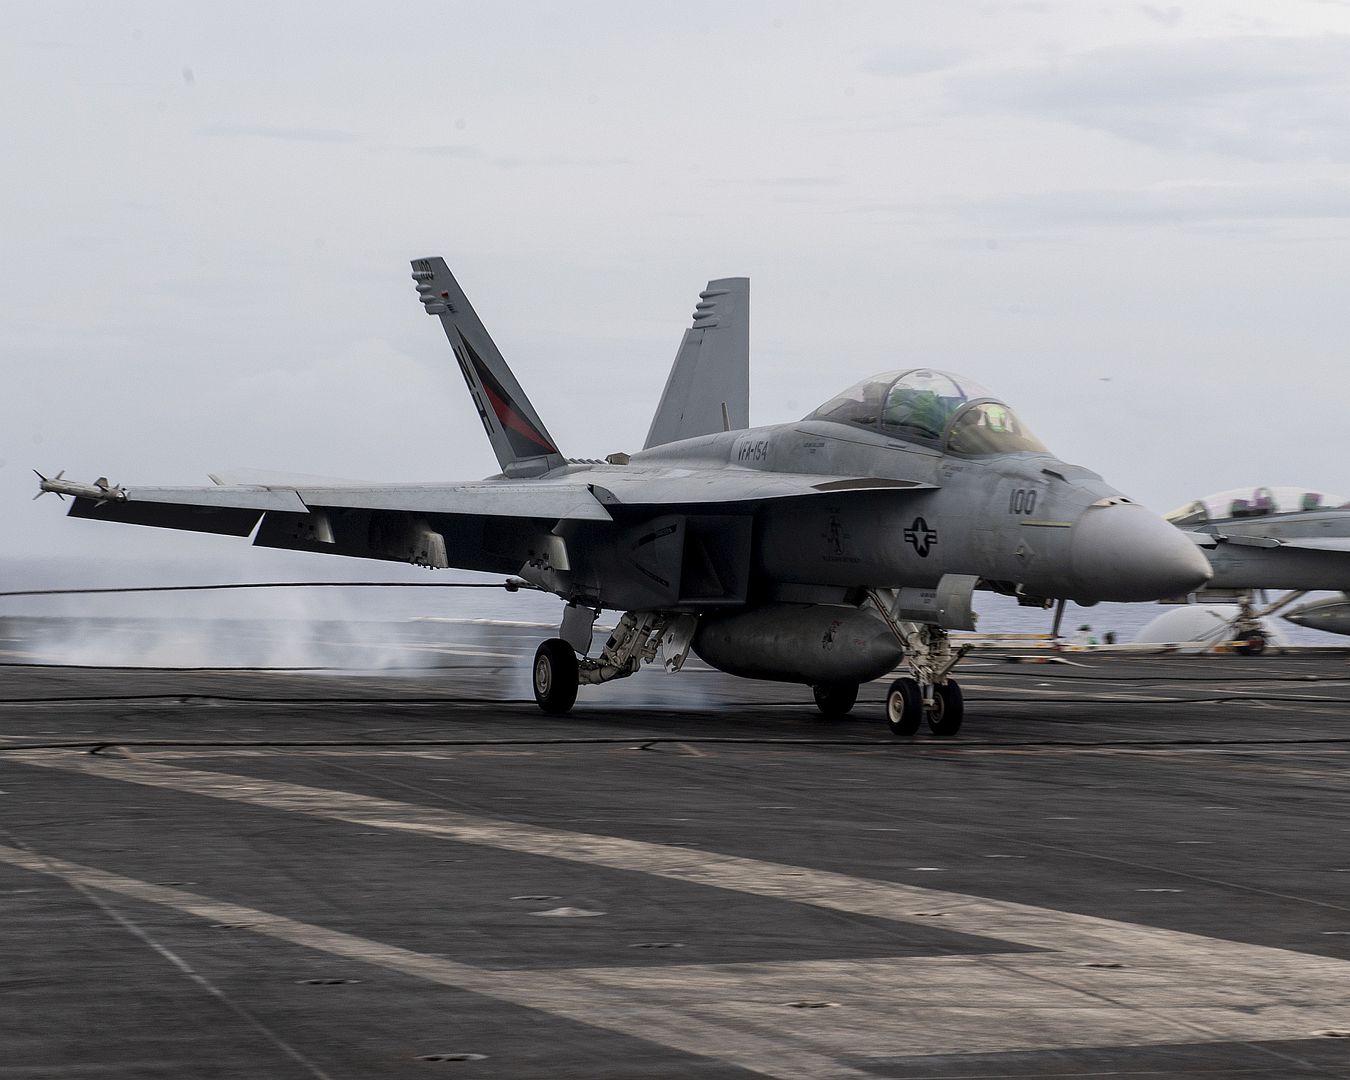  Lands On The Flight Deck Of The Aircraft Carrier USS Theodore Roosevelt